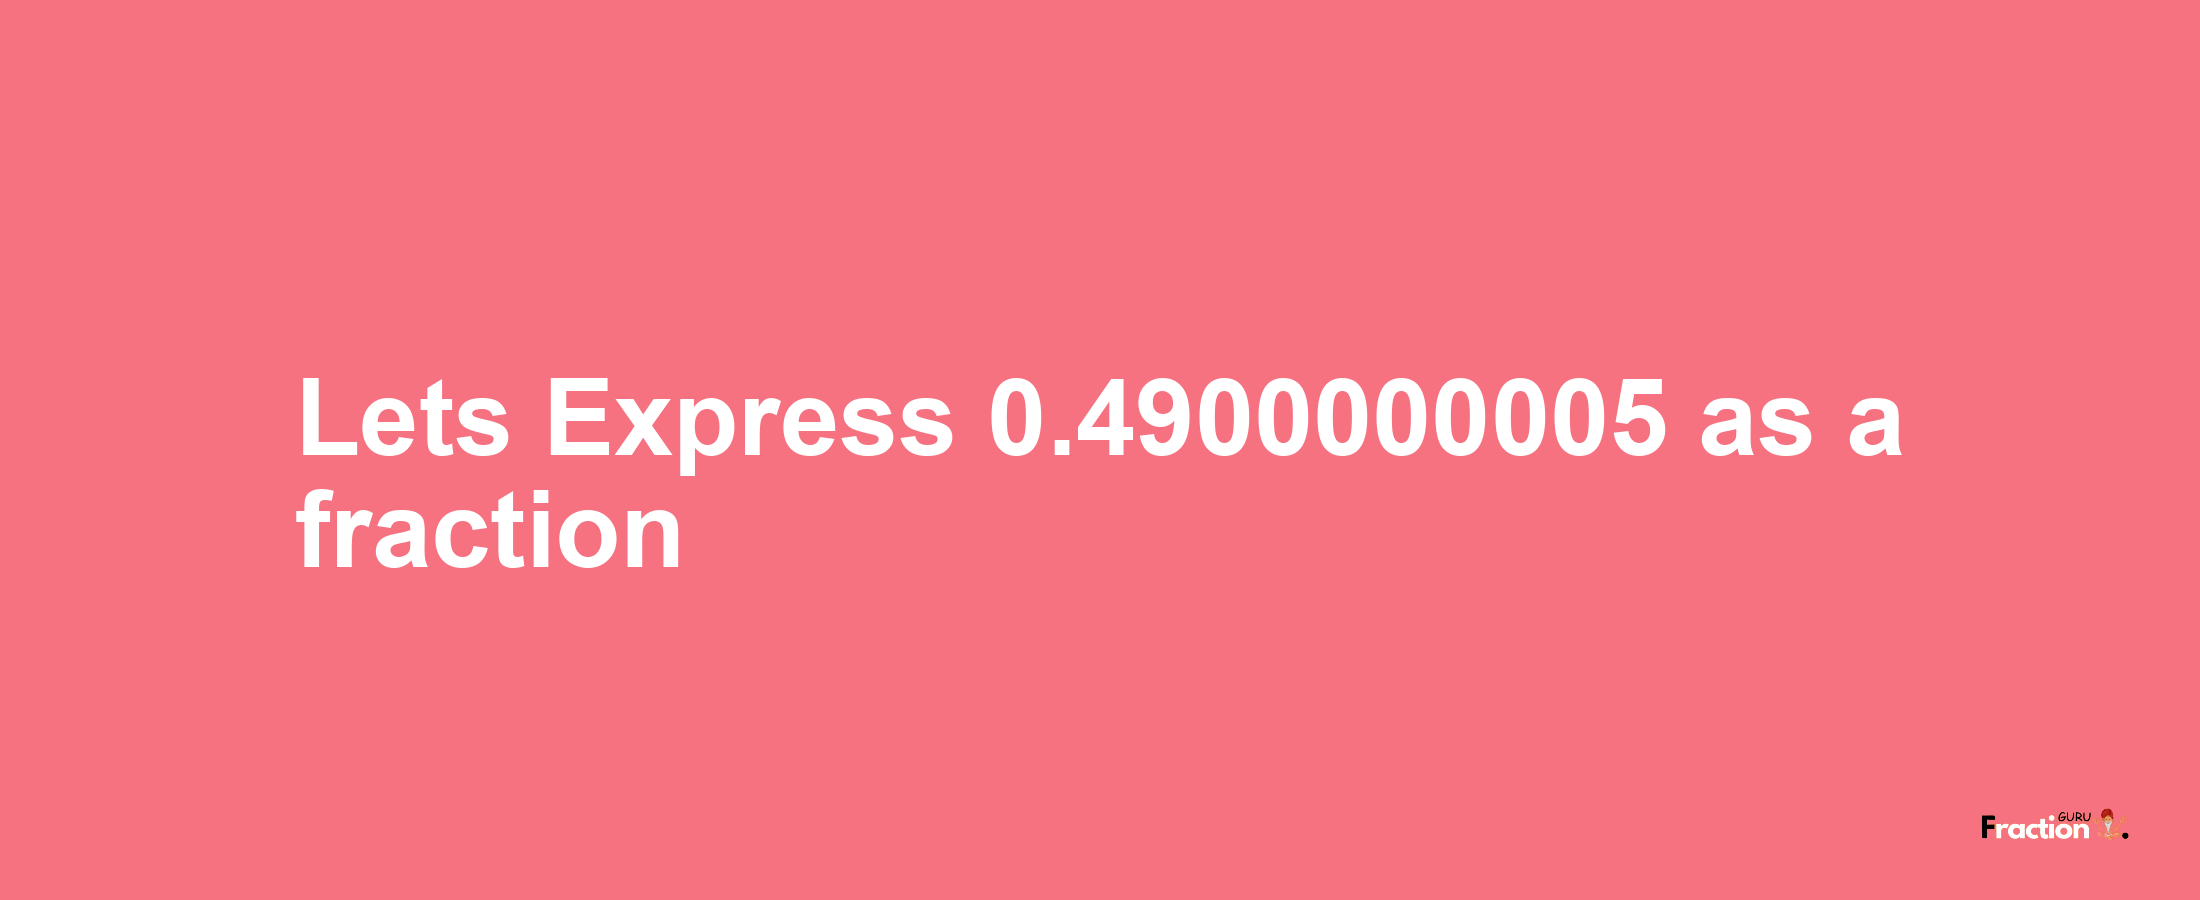 Lets Express 0.4900000005 as afraction